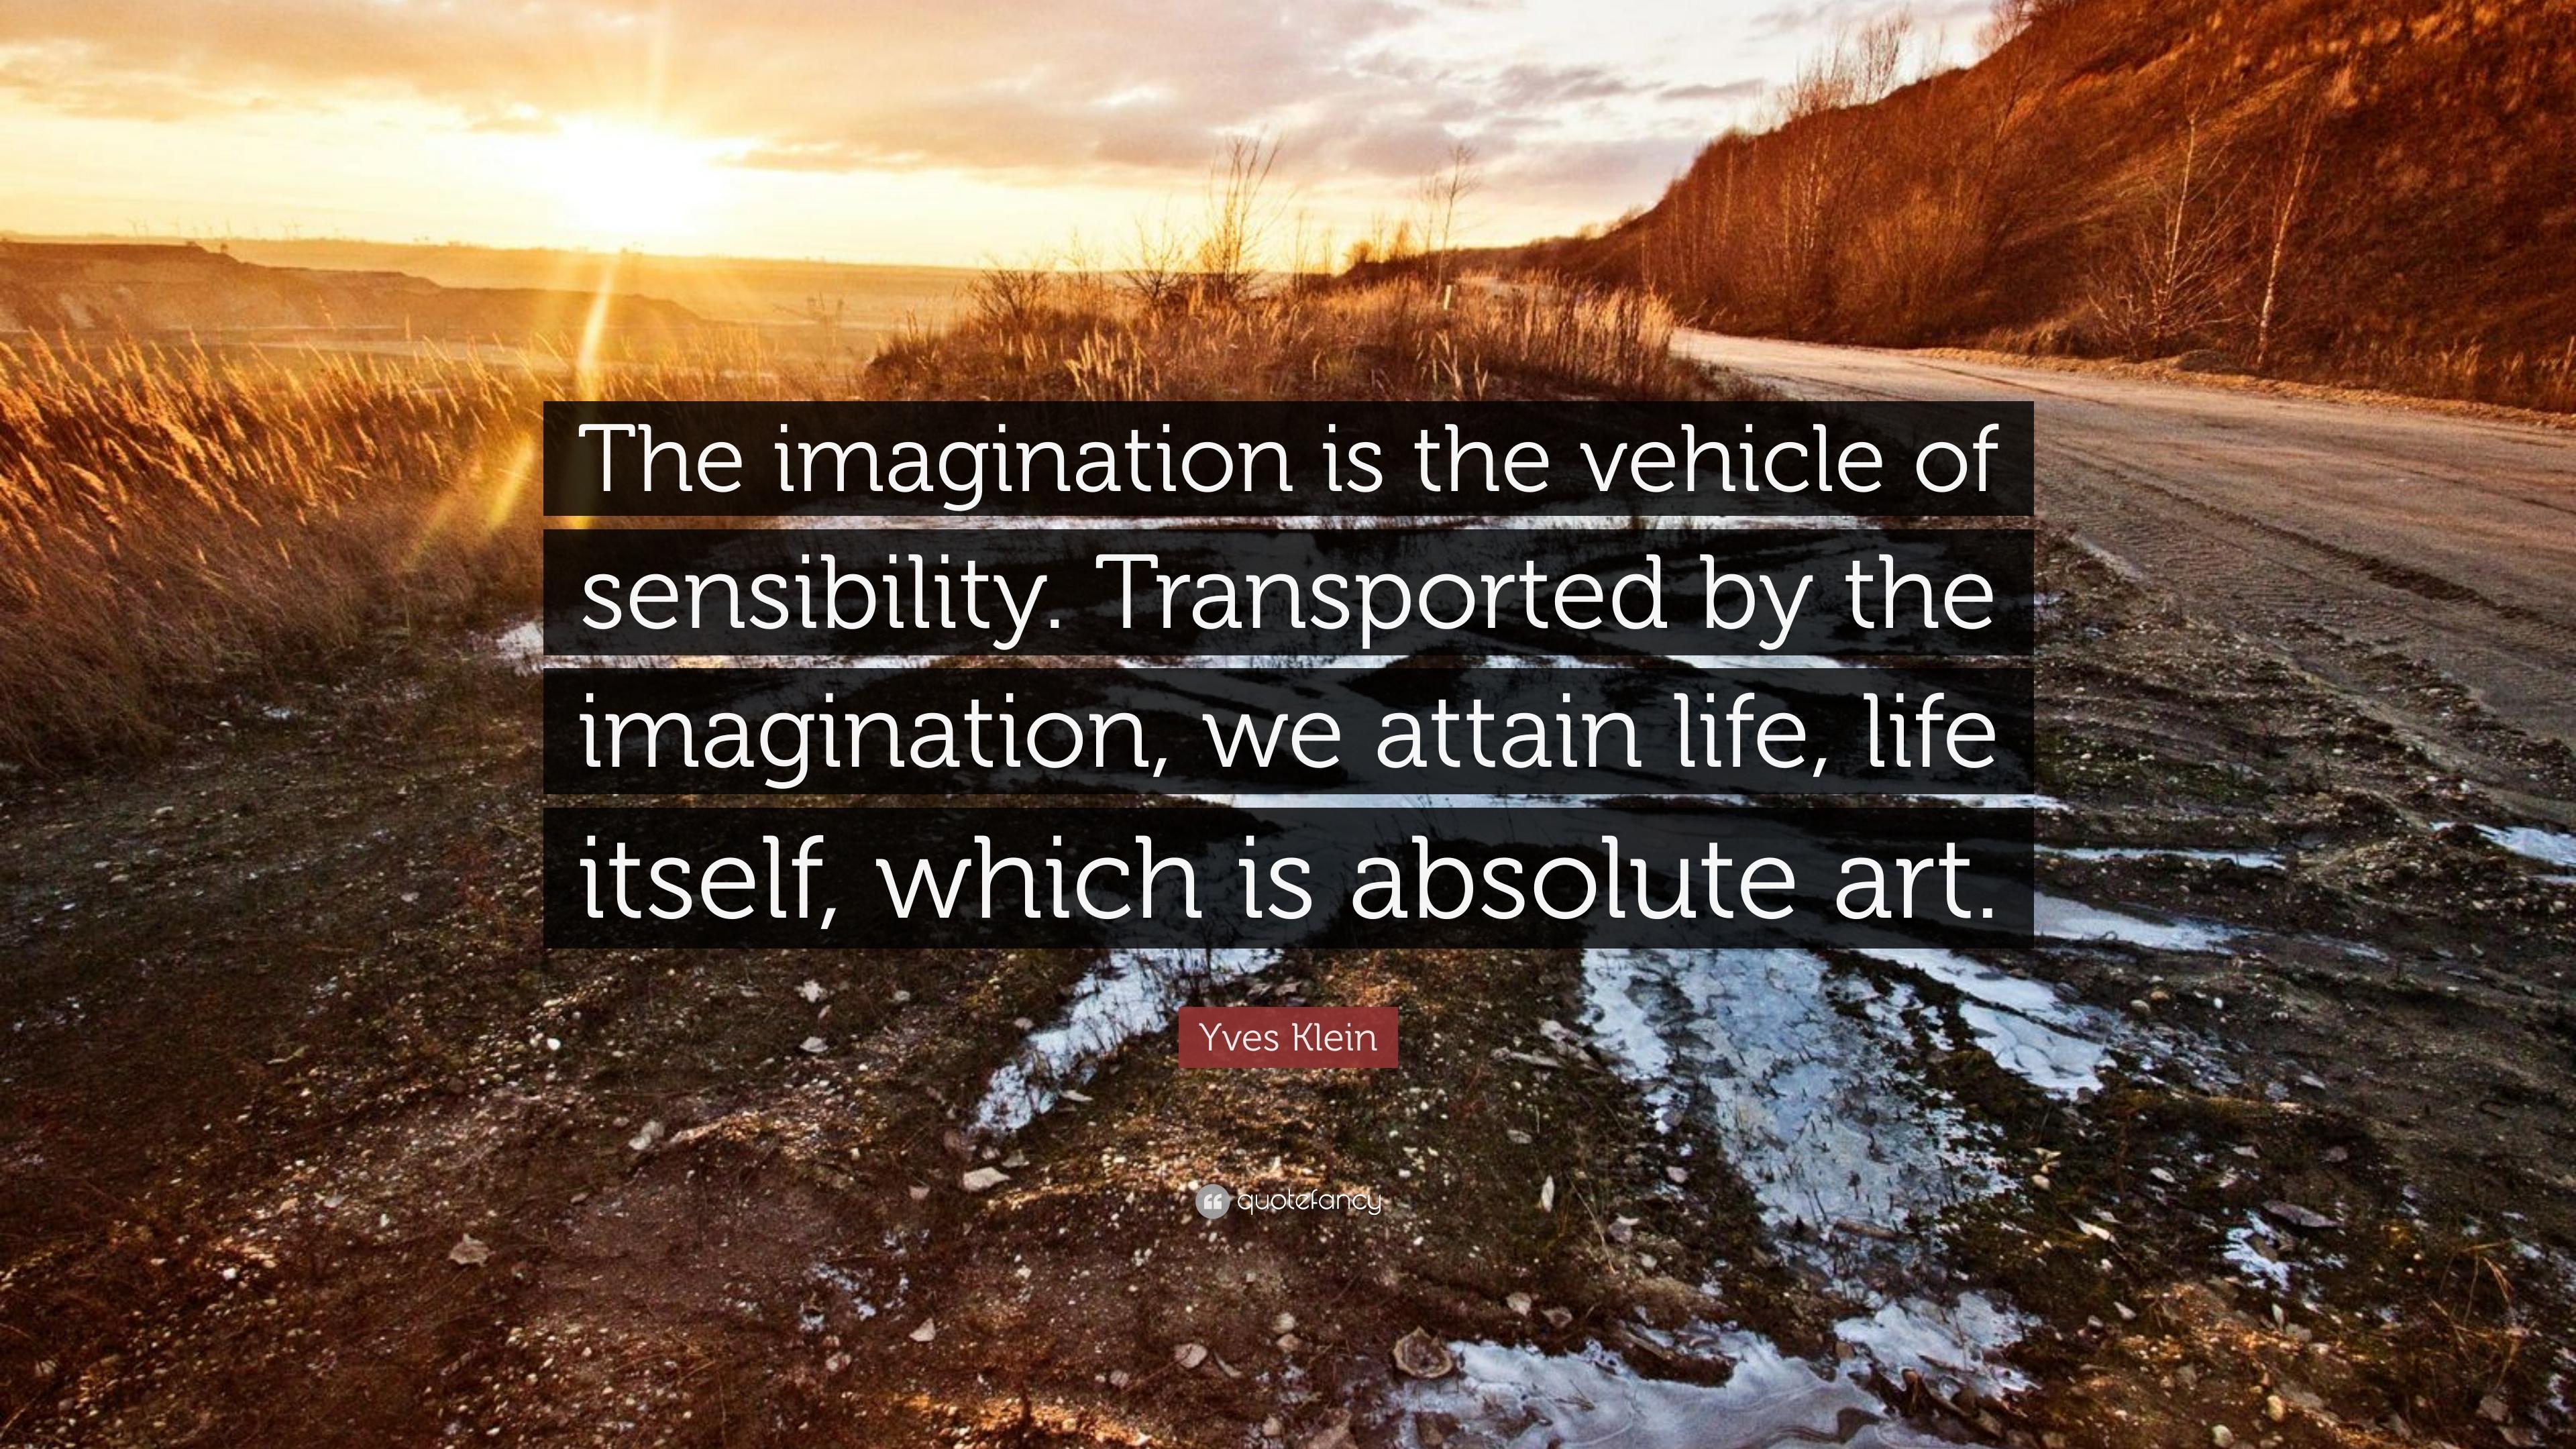 Yves Klein Quote: “The imagination is the vehicle